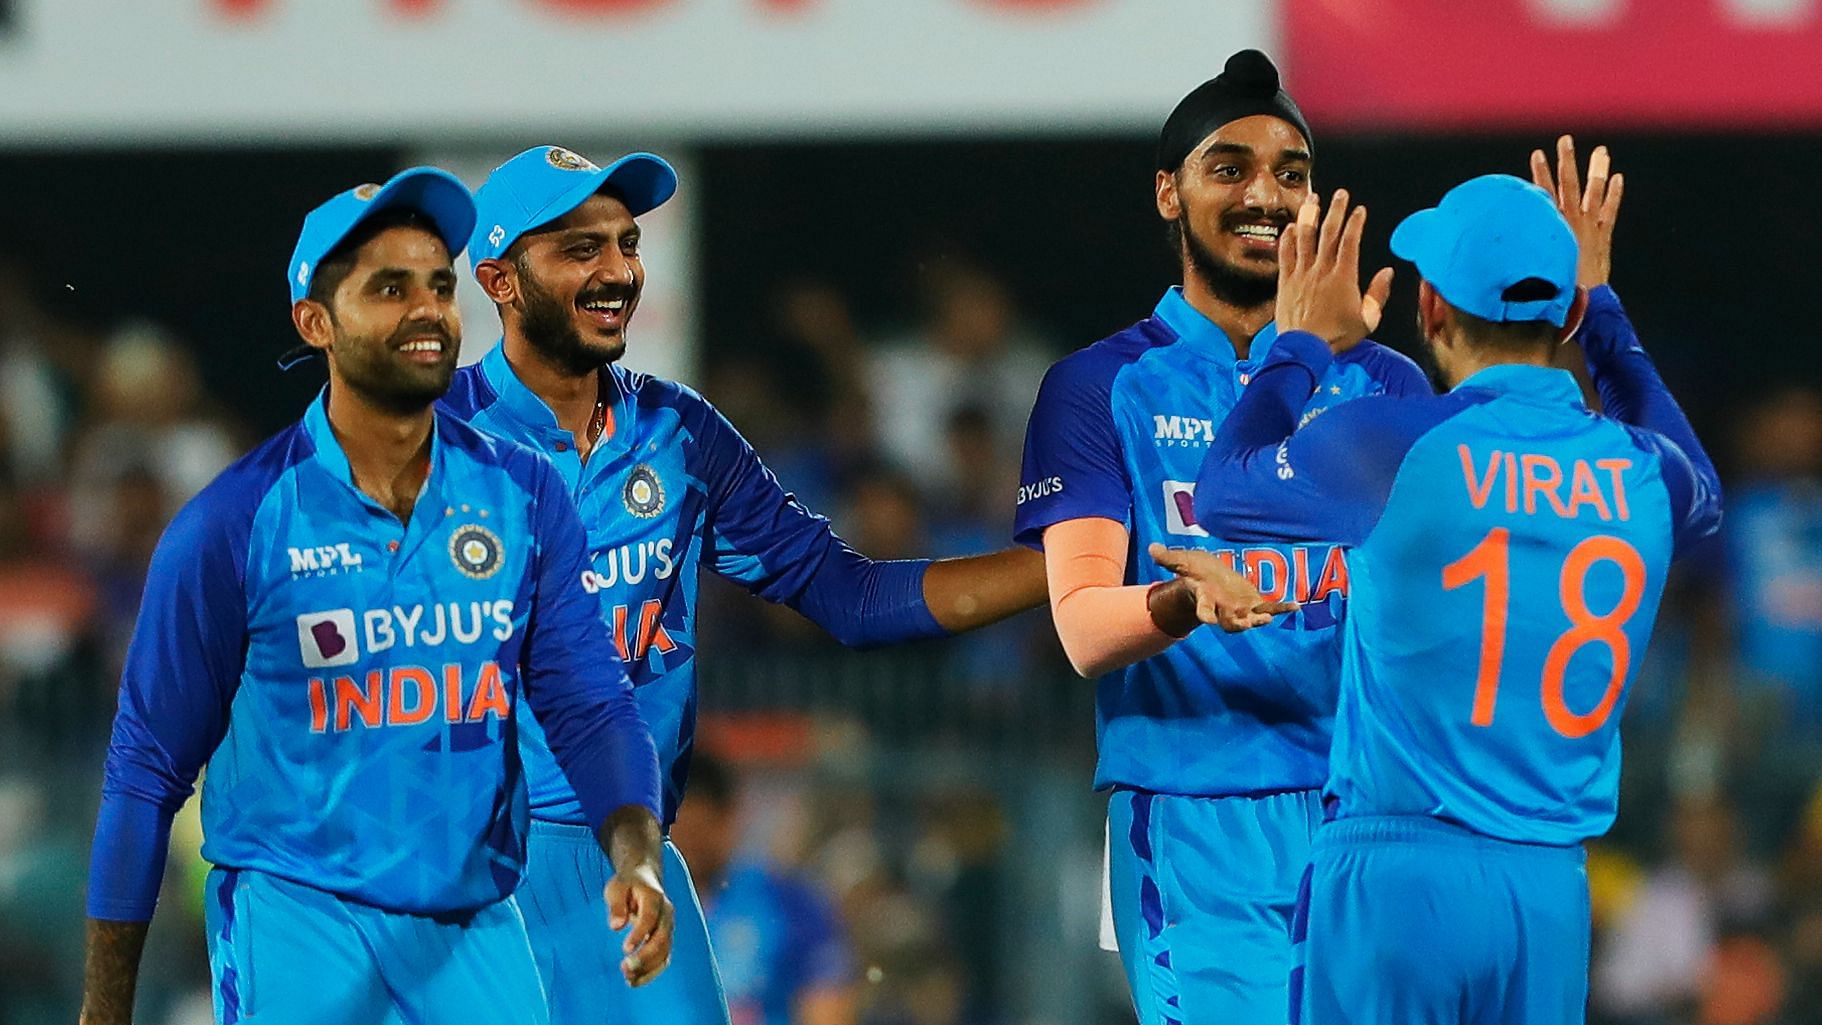 India vs South Africa, IND vs SA 2nd T20I 2022 Live Match Updates India Script Historic Series Win With 16-Run Win Over South Africa